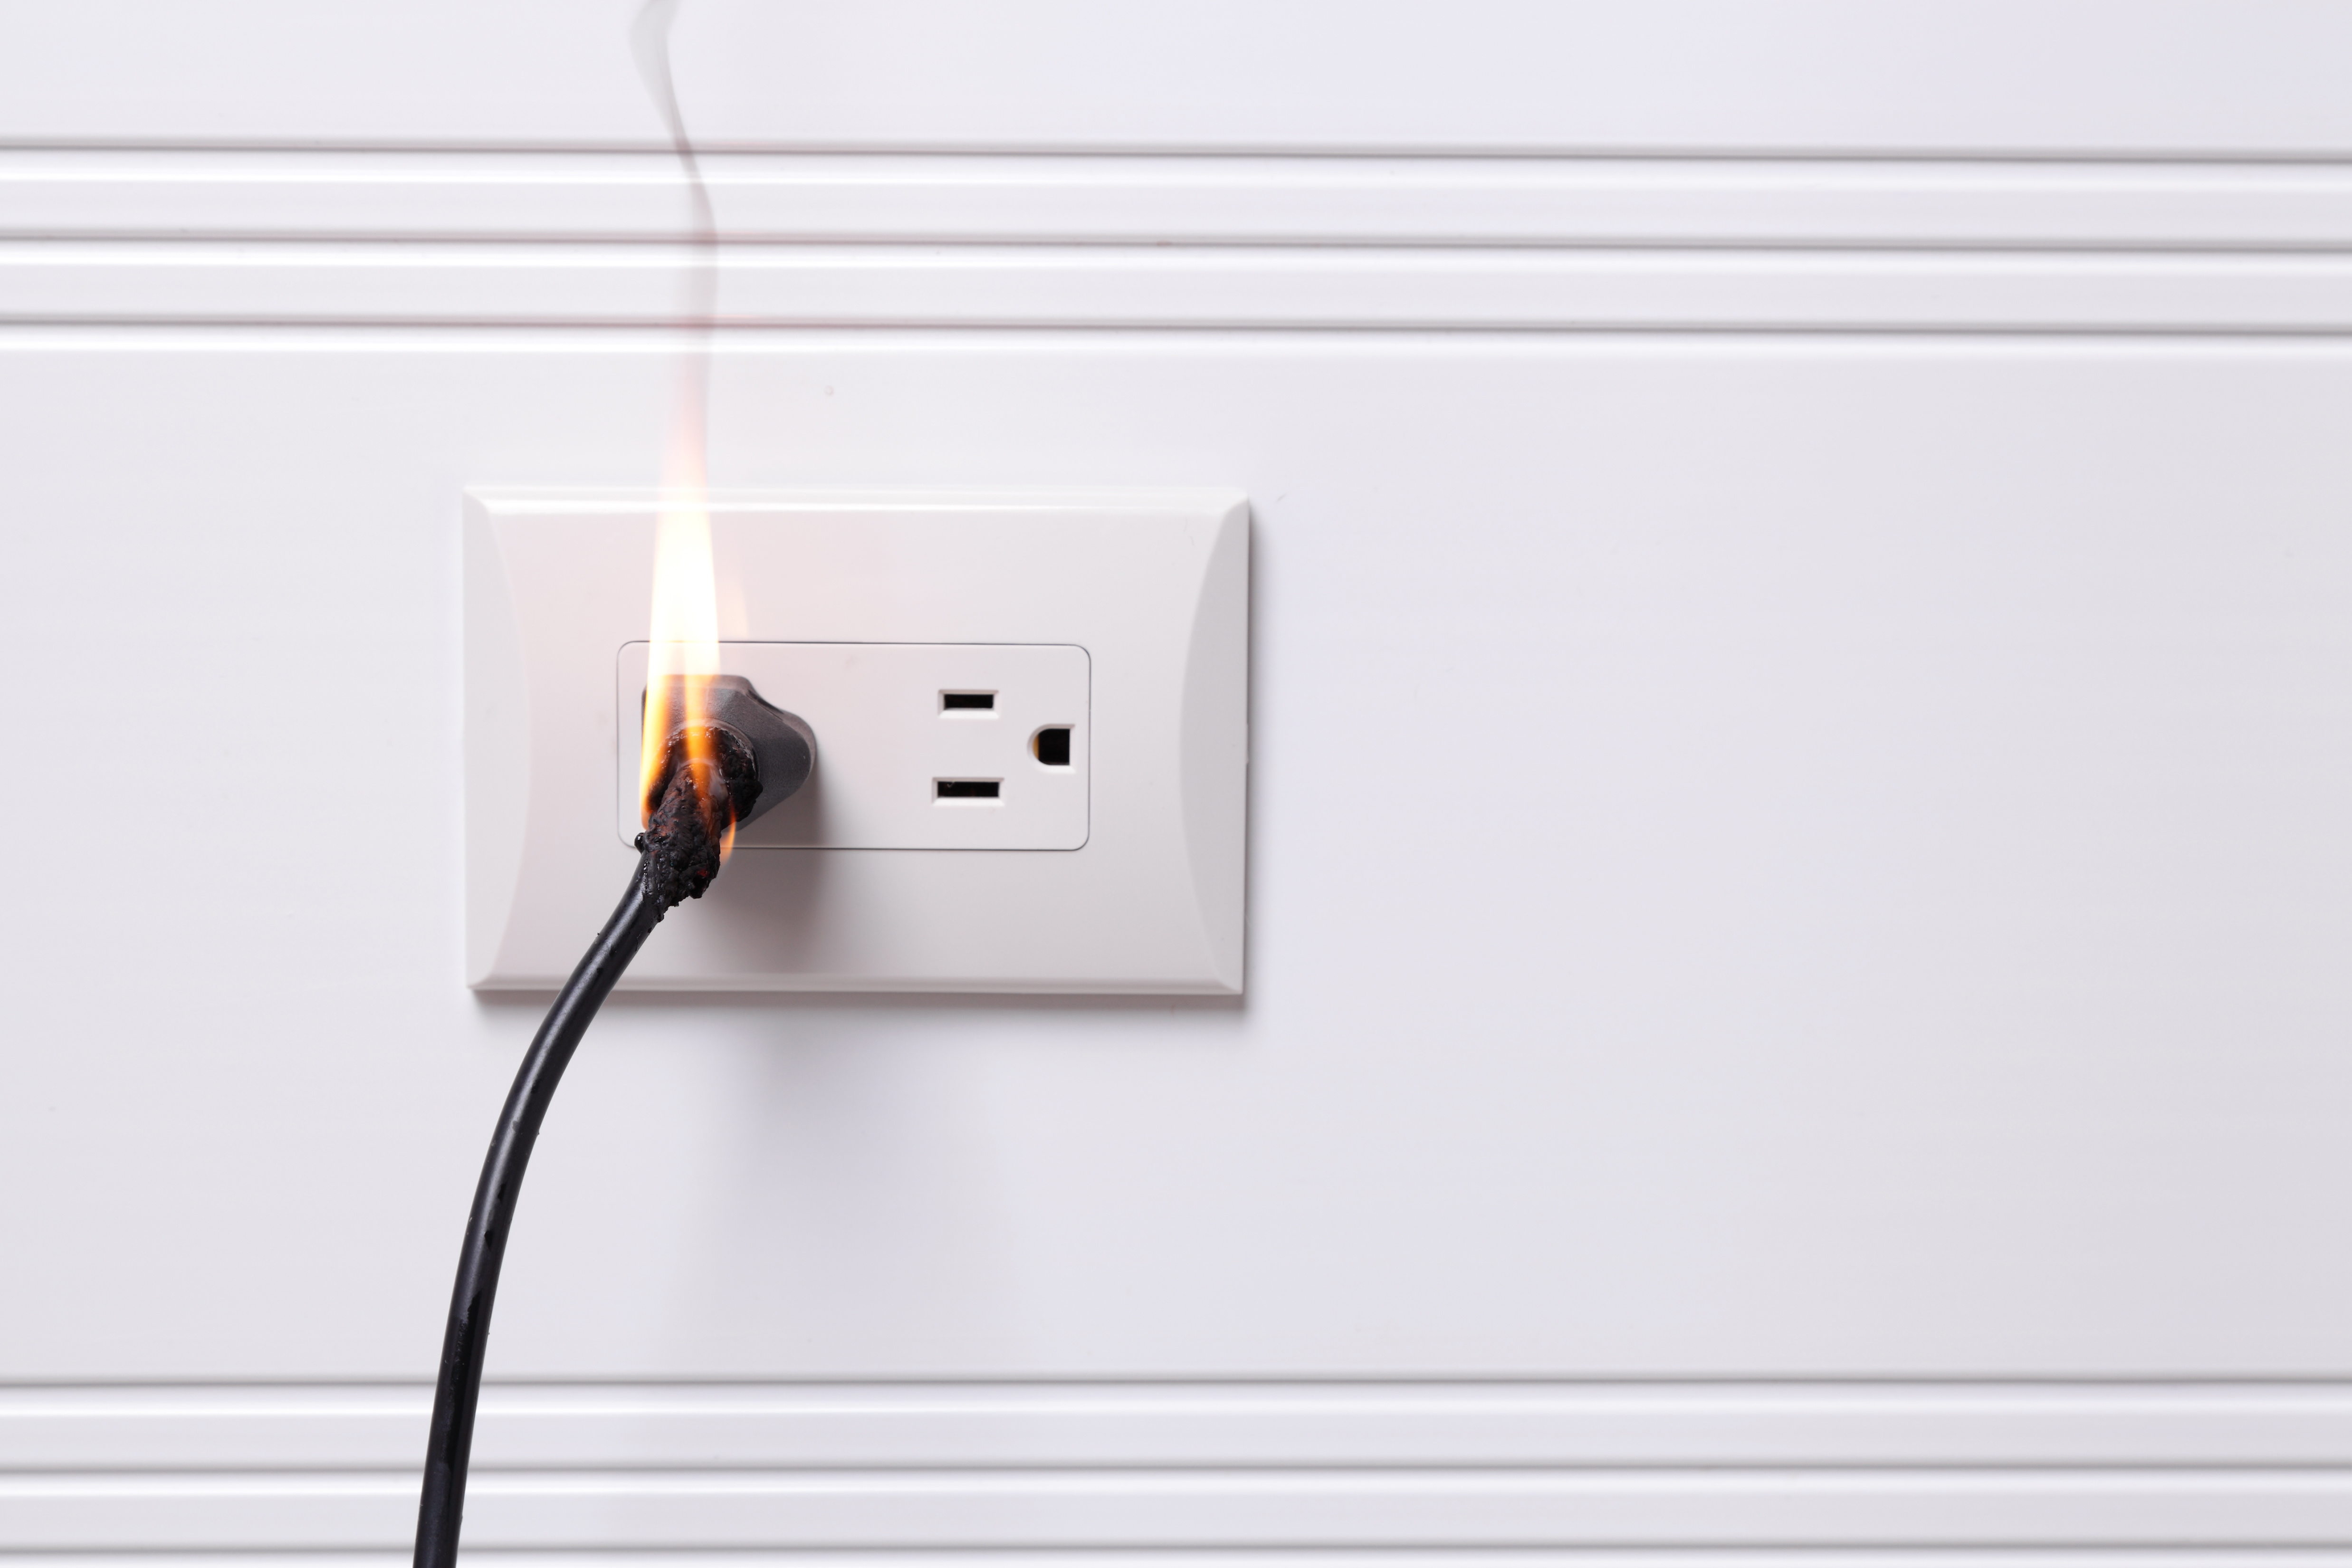 Outlet and plug catch on fire due to neglect from a home owner